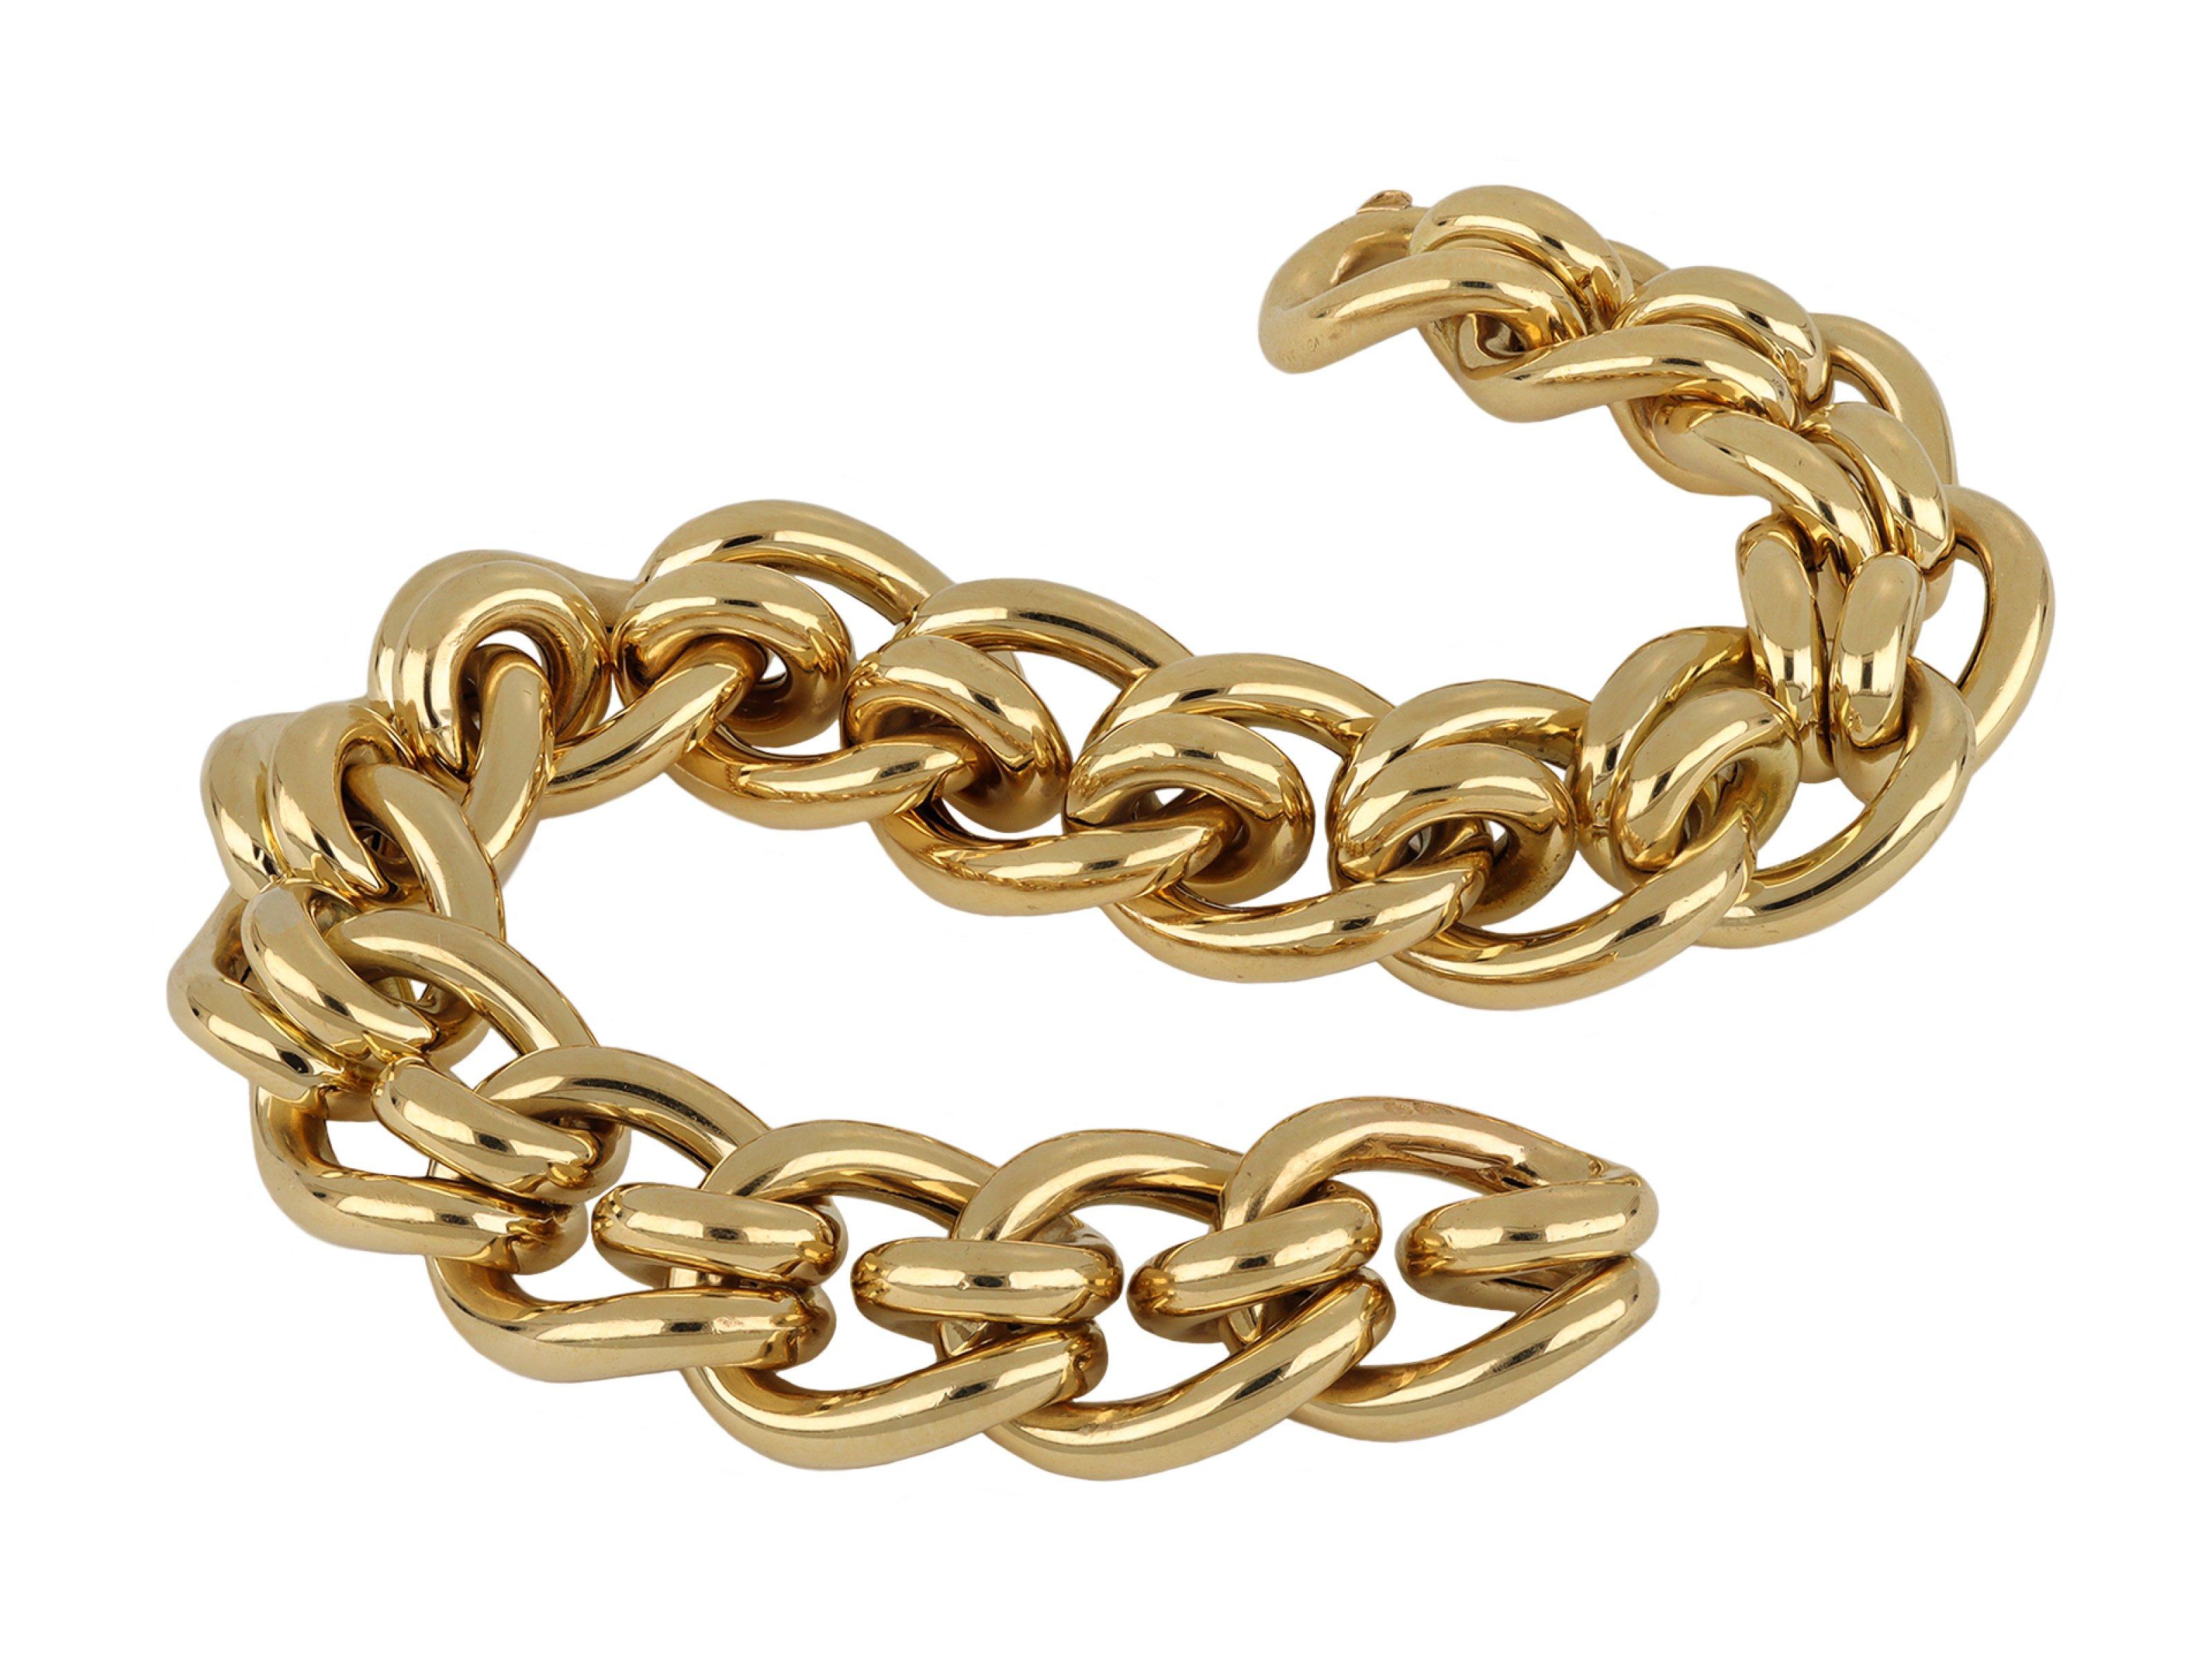 Cartier gold mousetrap link bracelet. A yellow gold articulated bracelet comprised of seventeen sections of tubular woven mousetrap links, flowing with movement and fitted with a secure integrated clasp and safety catch, approximately 7.5